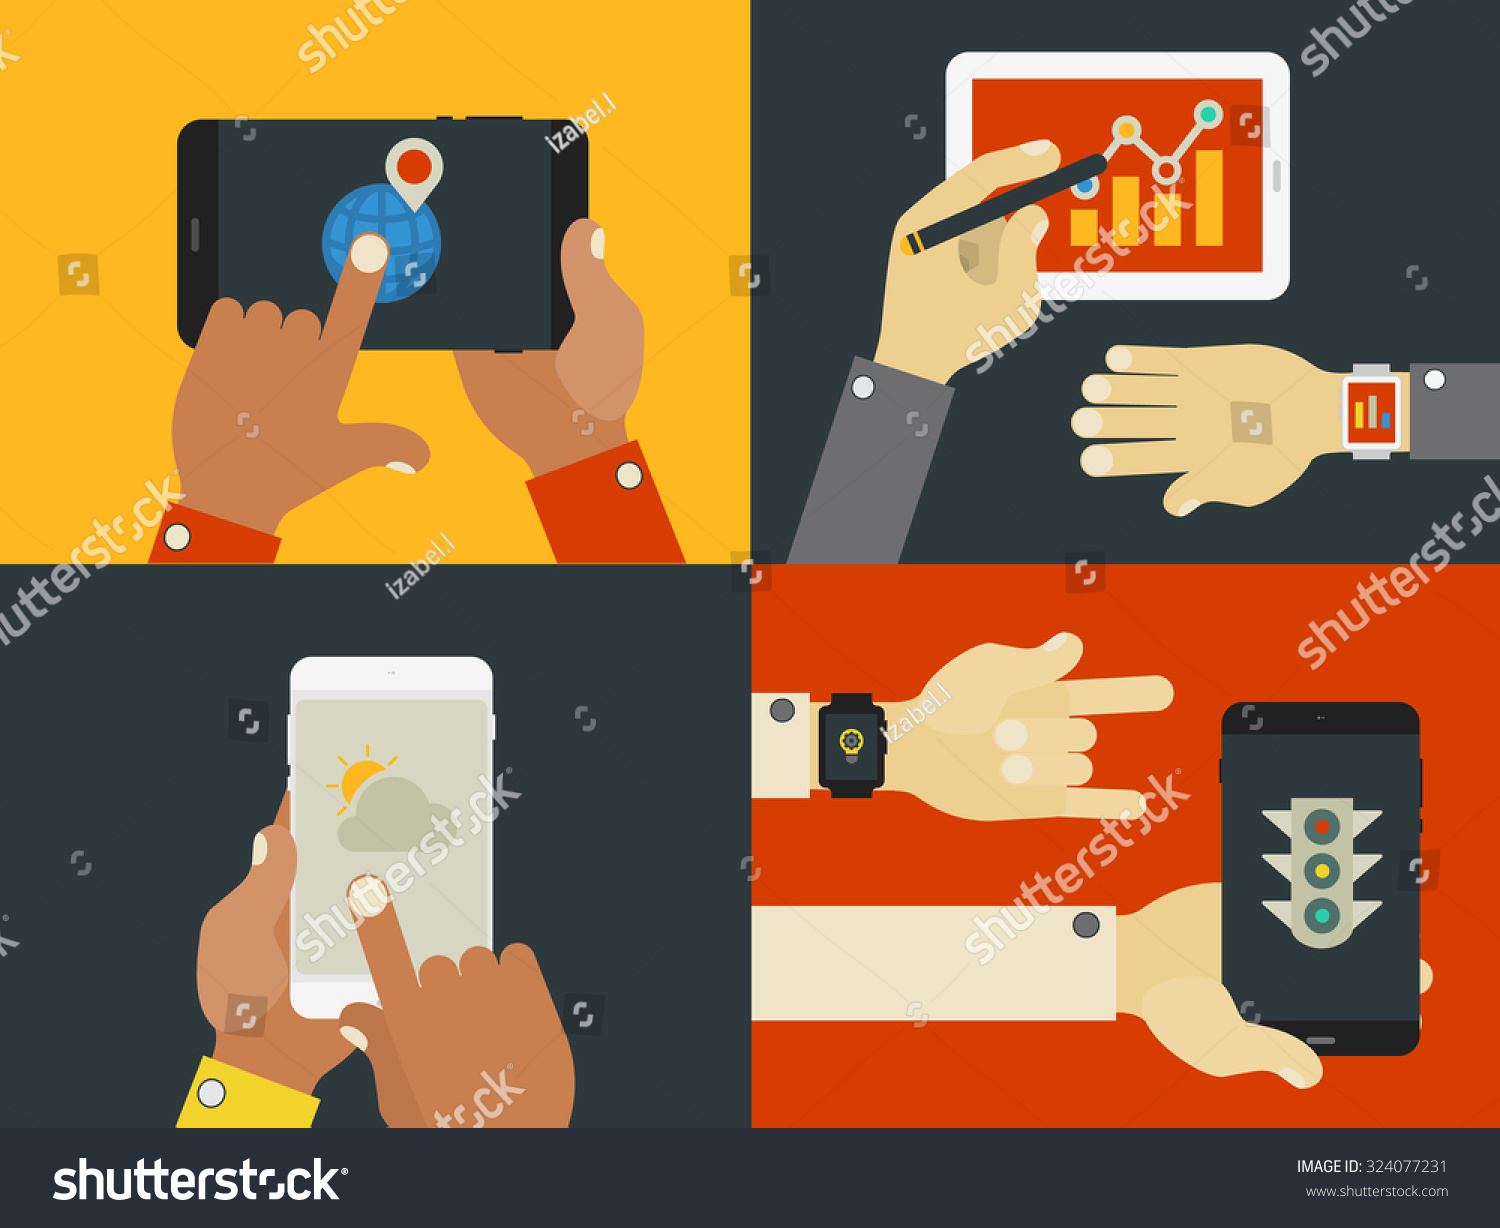 SVG of Flat design illustrations with hands holding mobile devices, smartphones, tablets and smart-watches svg